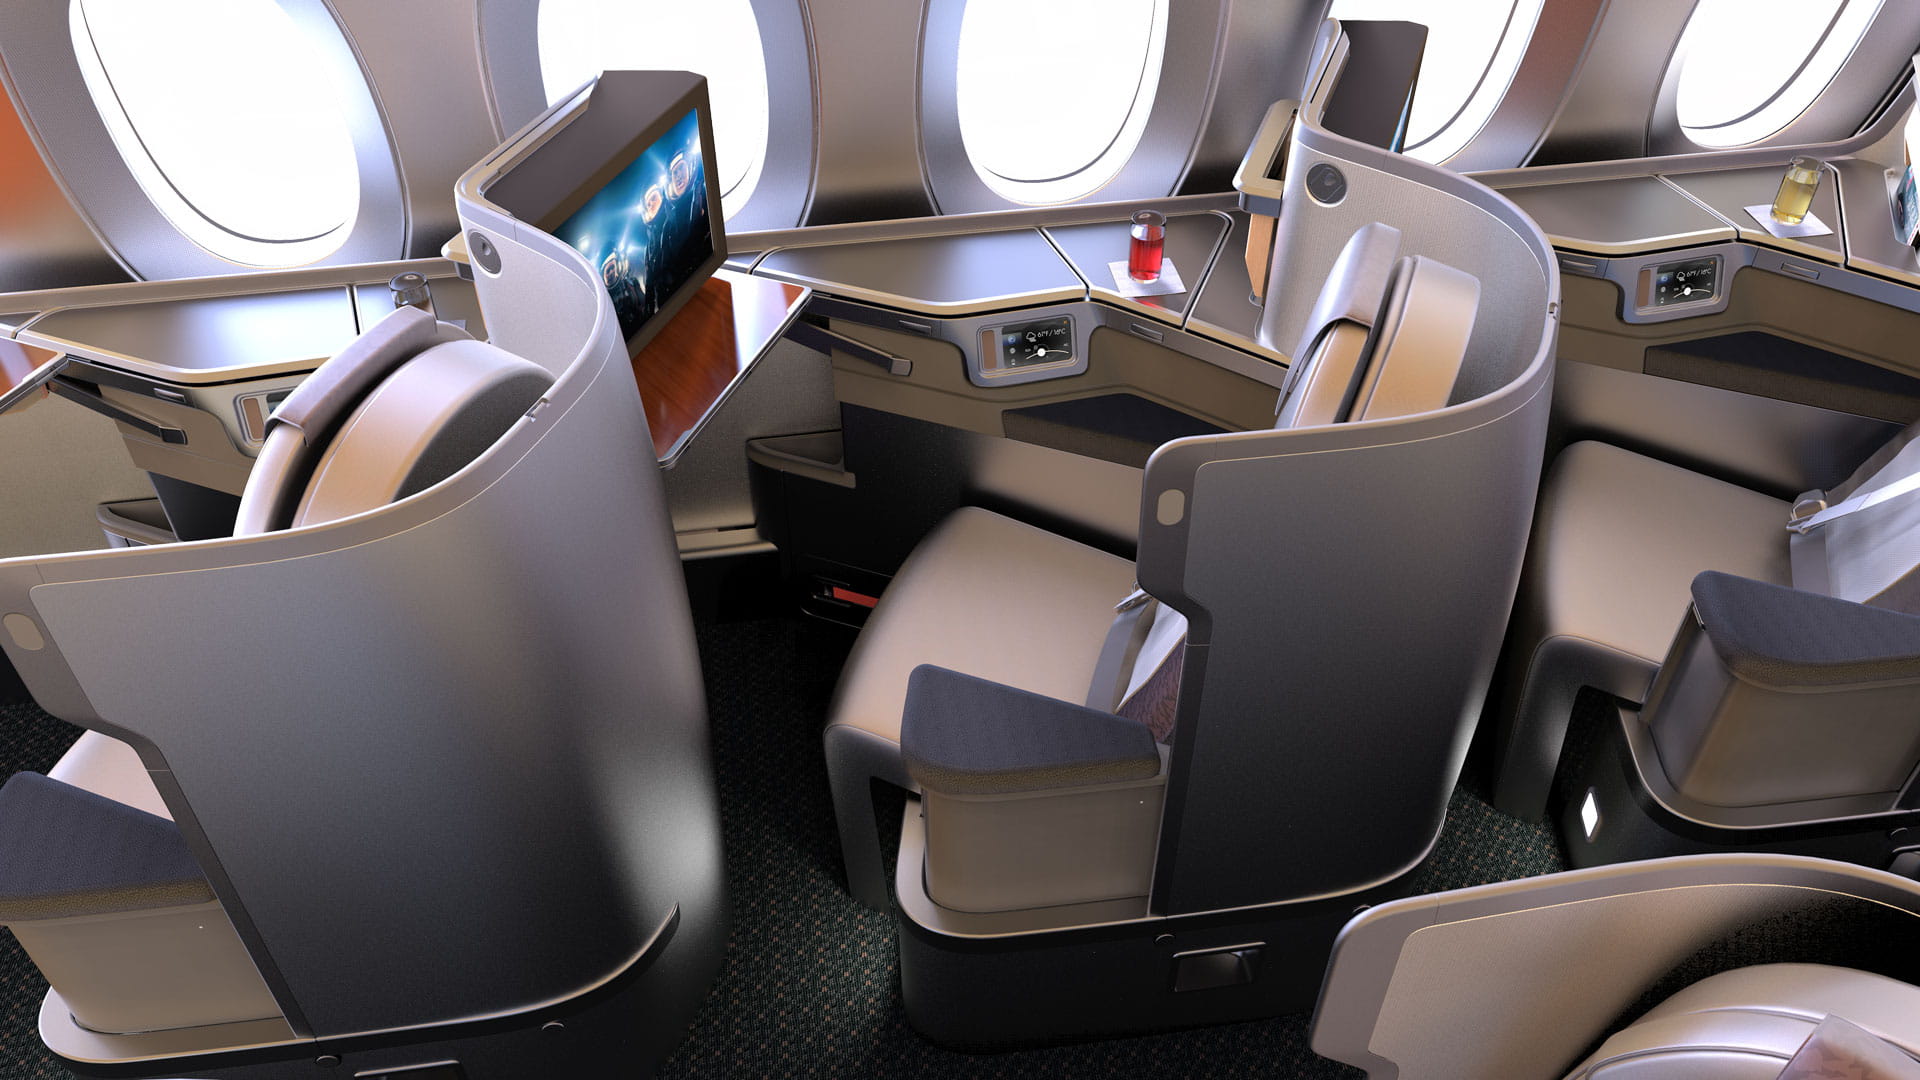 Business class seats on a commercial aircraft